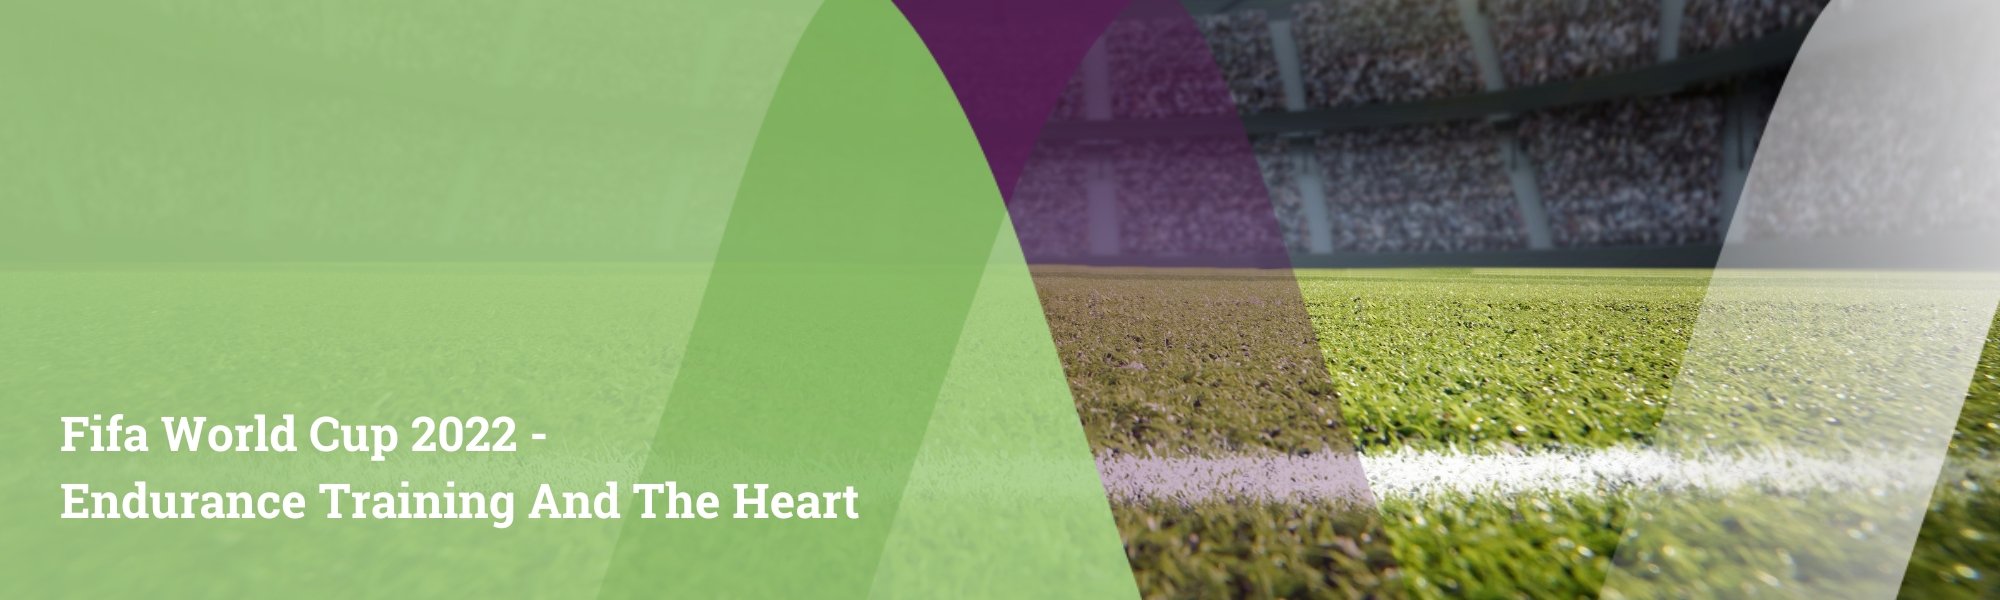 Football and the Heart